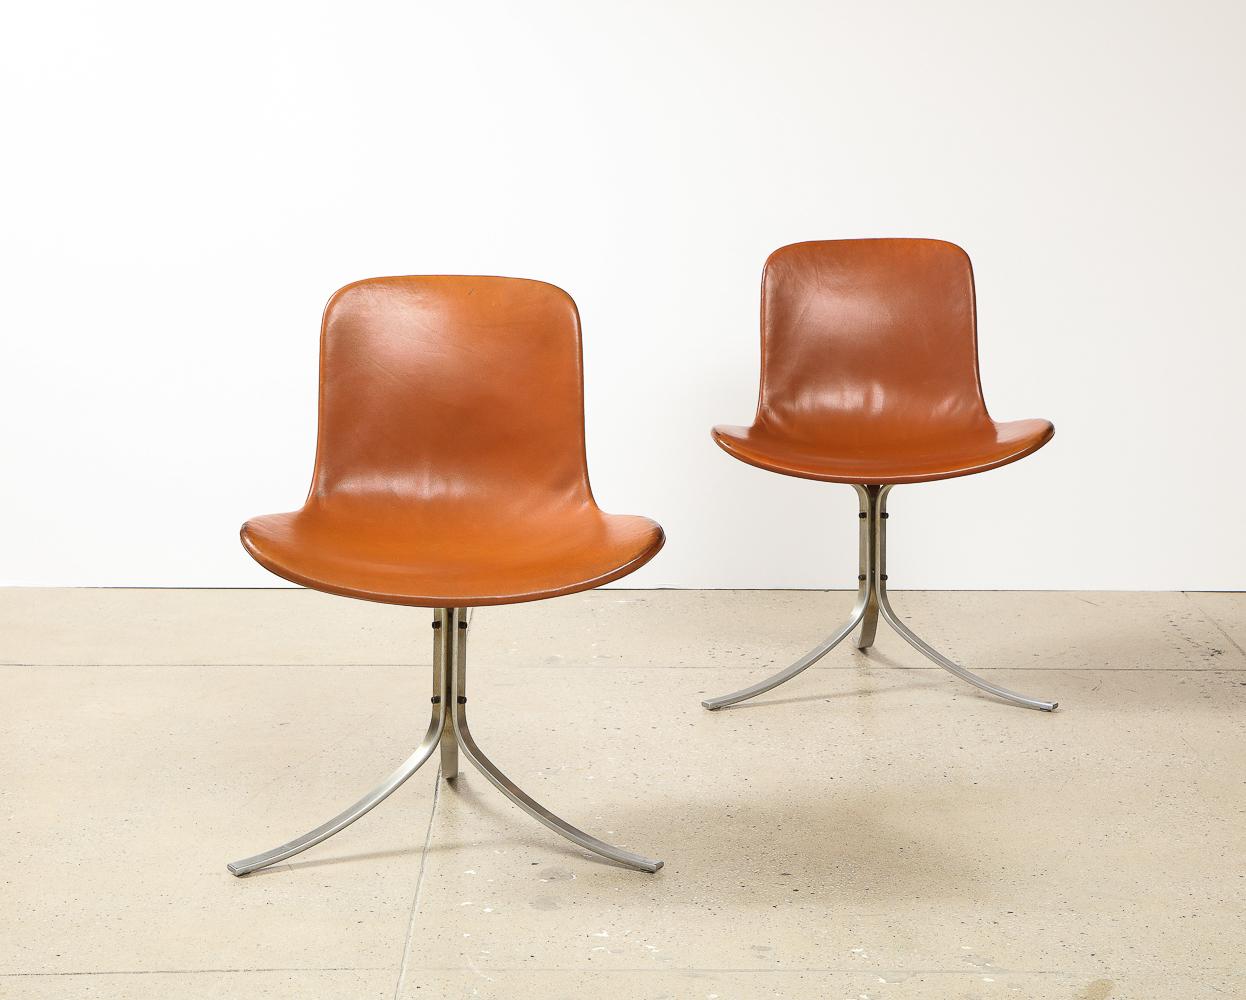 Hand-Crafted Set of 6 PK9 Chairs by Poul Kjaerholm